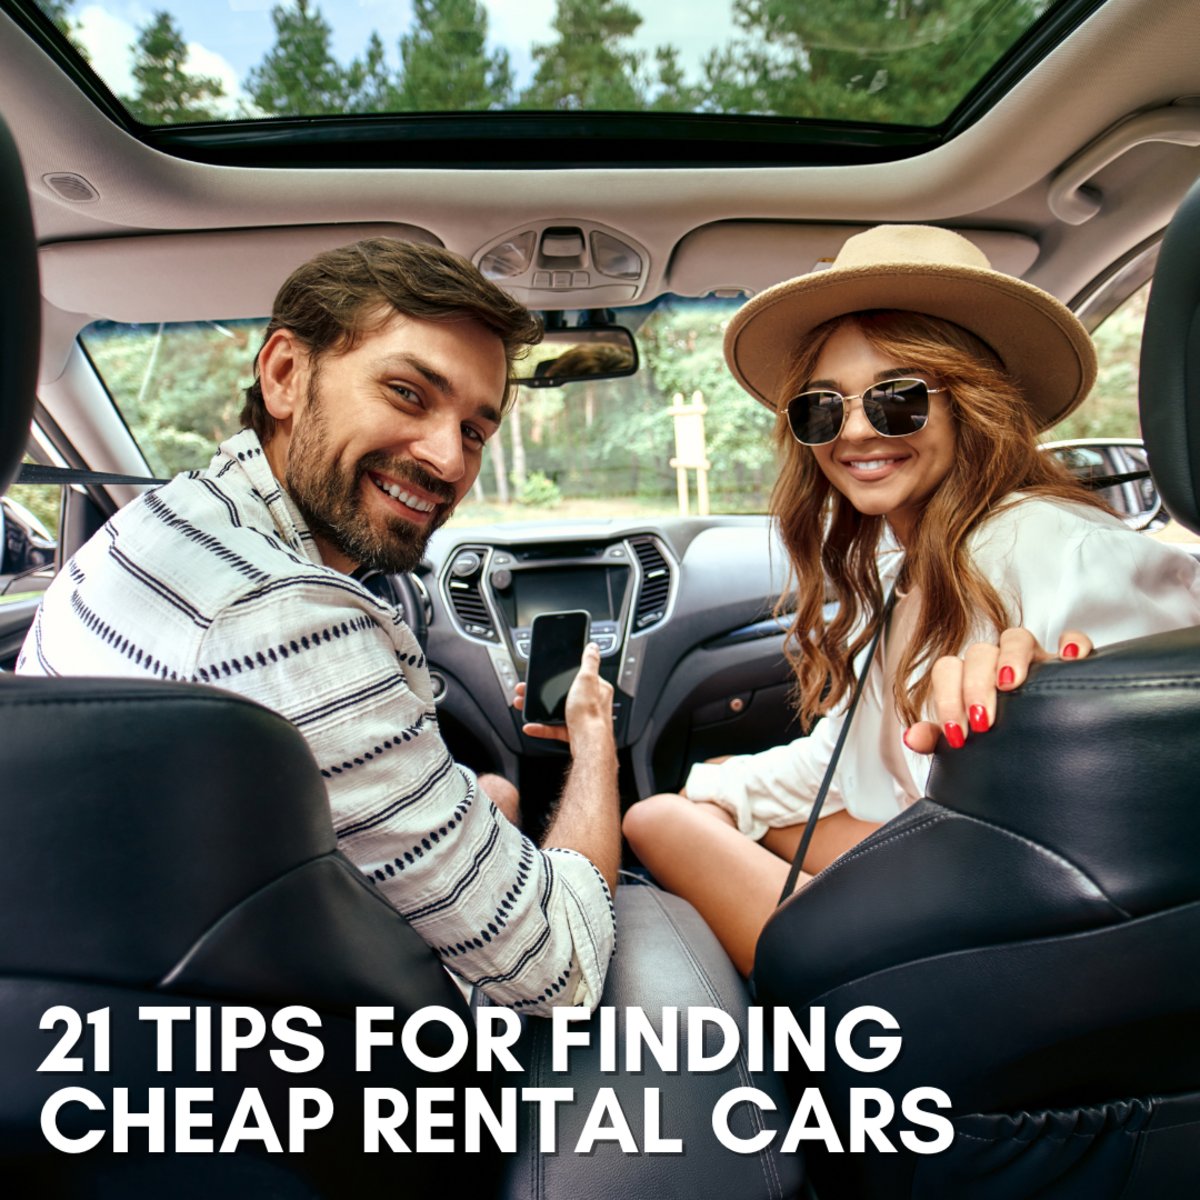 Planning on hitting the open road on your way to Miami Beach? 🚗 Read these 21 tips for scoring sweet deals on #rentalcars so that you can explore without breaking the bank. bit.ly/3uBCqBJ #roadtrip #savvytraveler